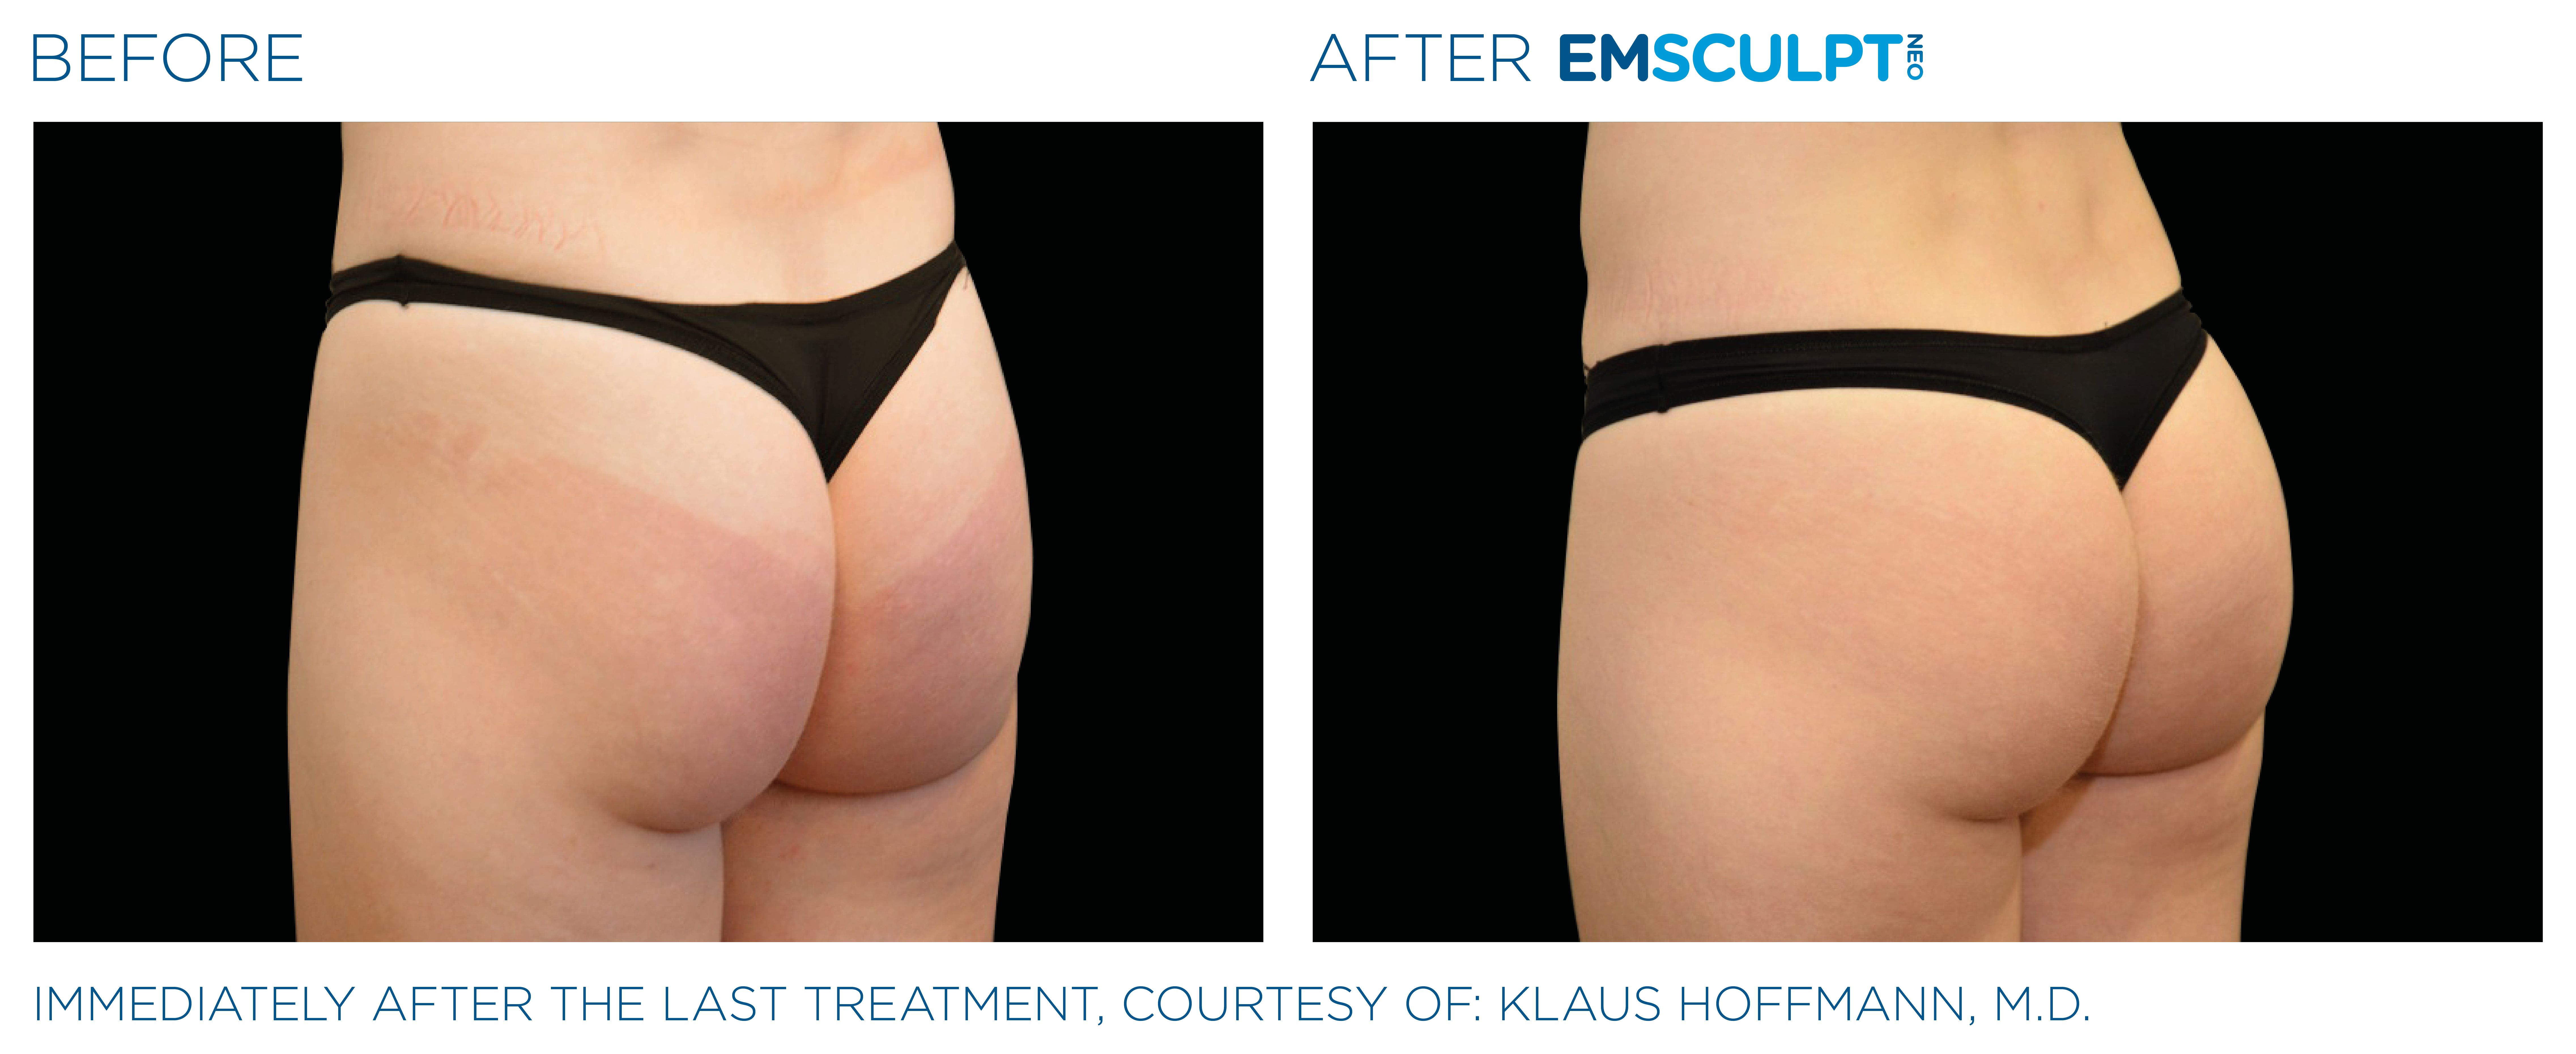 EMSCULPT NEO BEFORE and AFTER buttocks